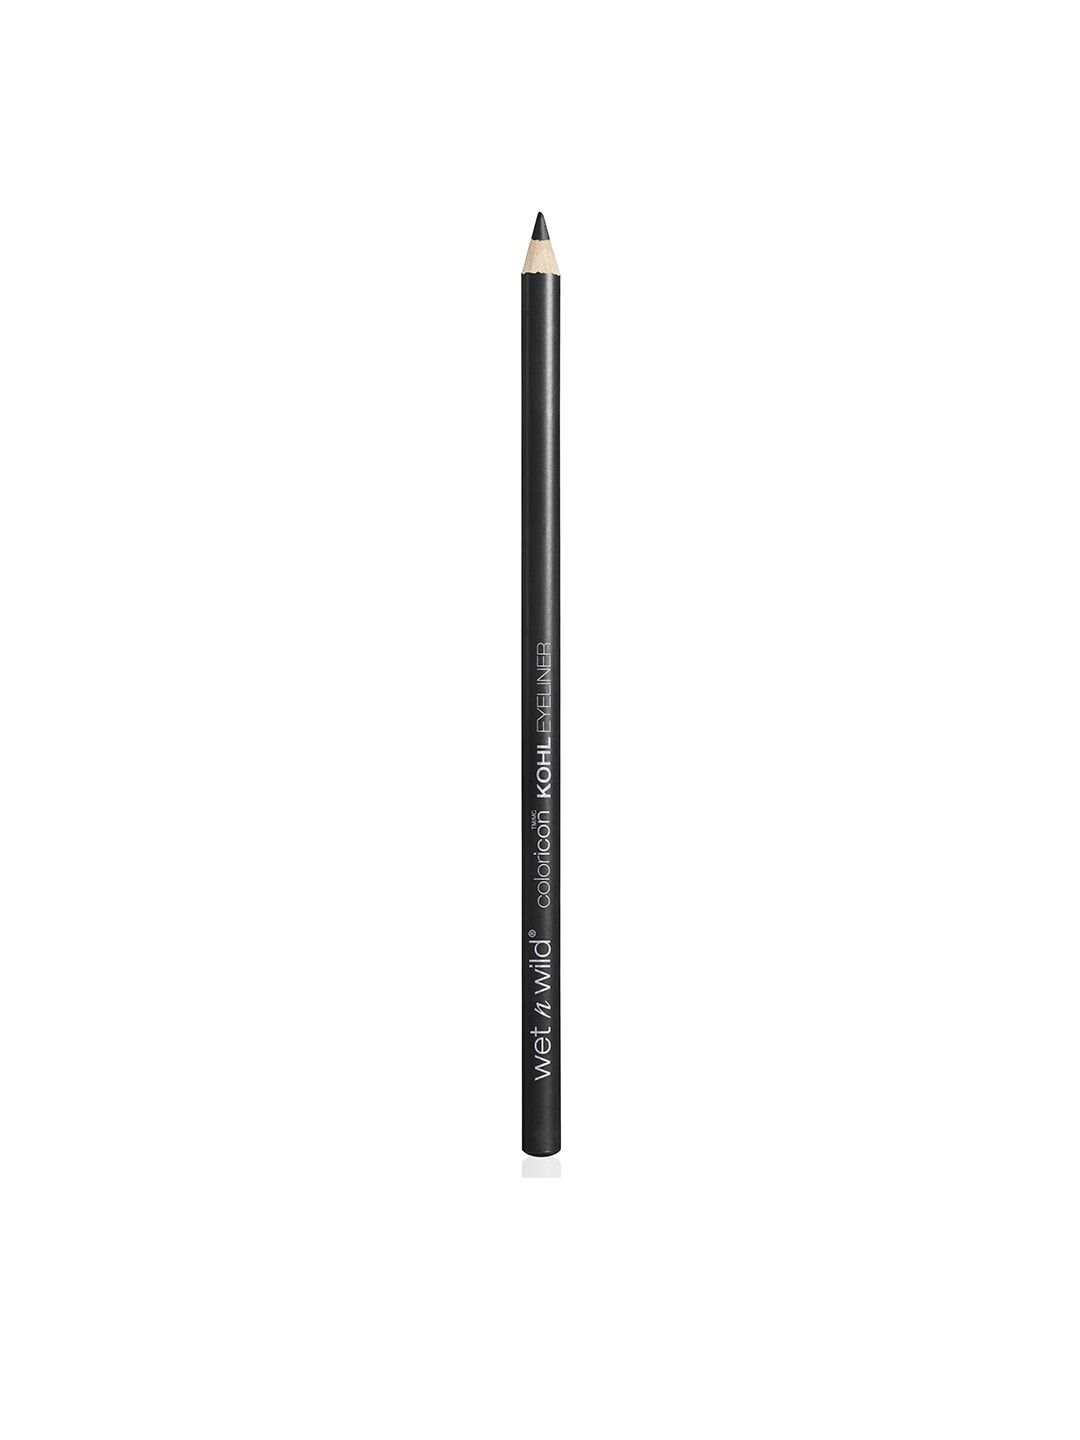 Wet n Wild Color Icon Kohl Liner Pencil - Baby's Got Black E601A 1.4 g Price in India